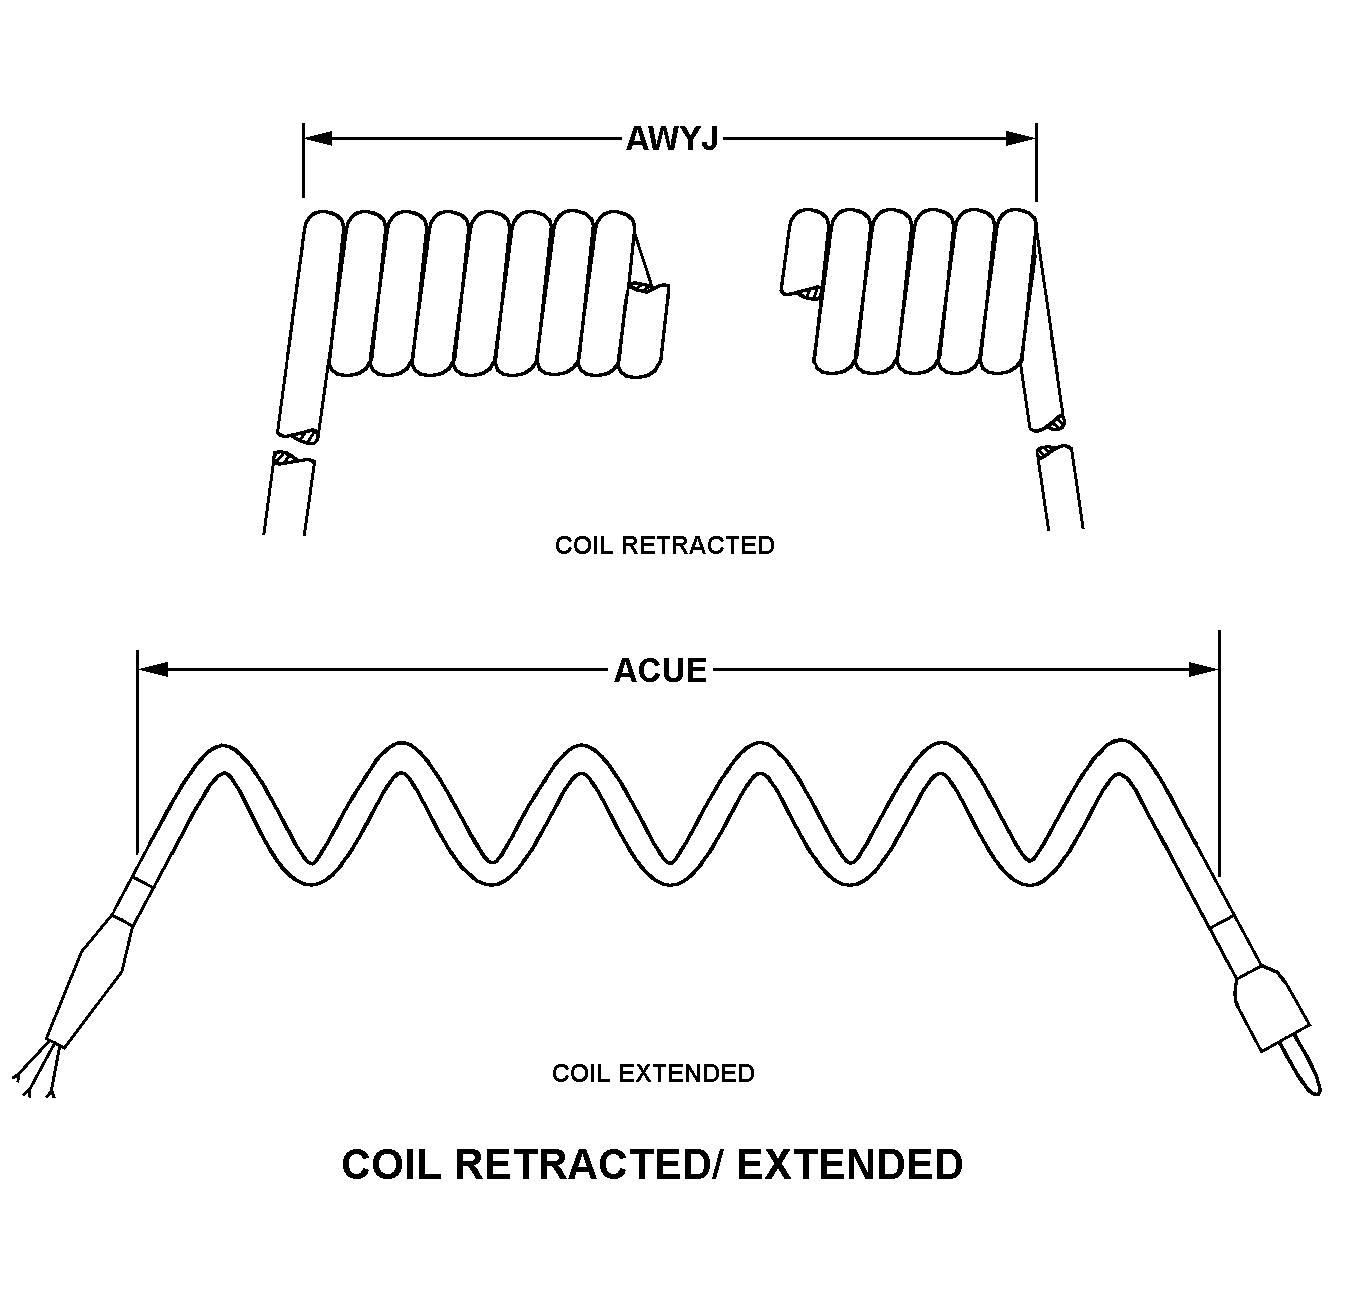 COIL RETRACTED/EXTENDED style nsn 6150-01-513-9246